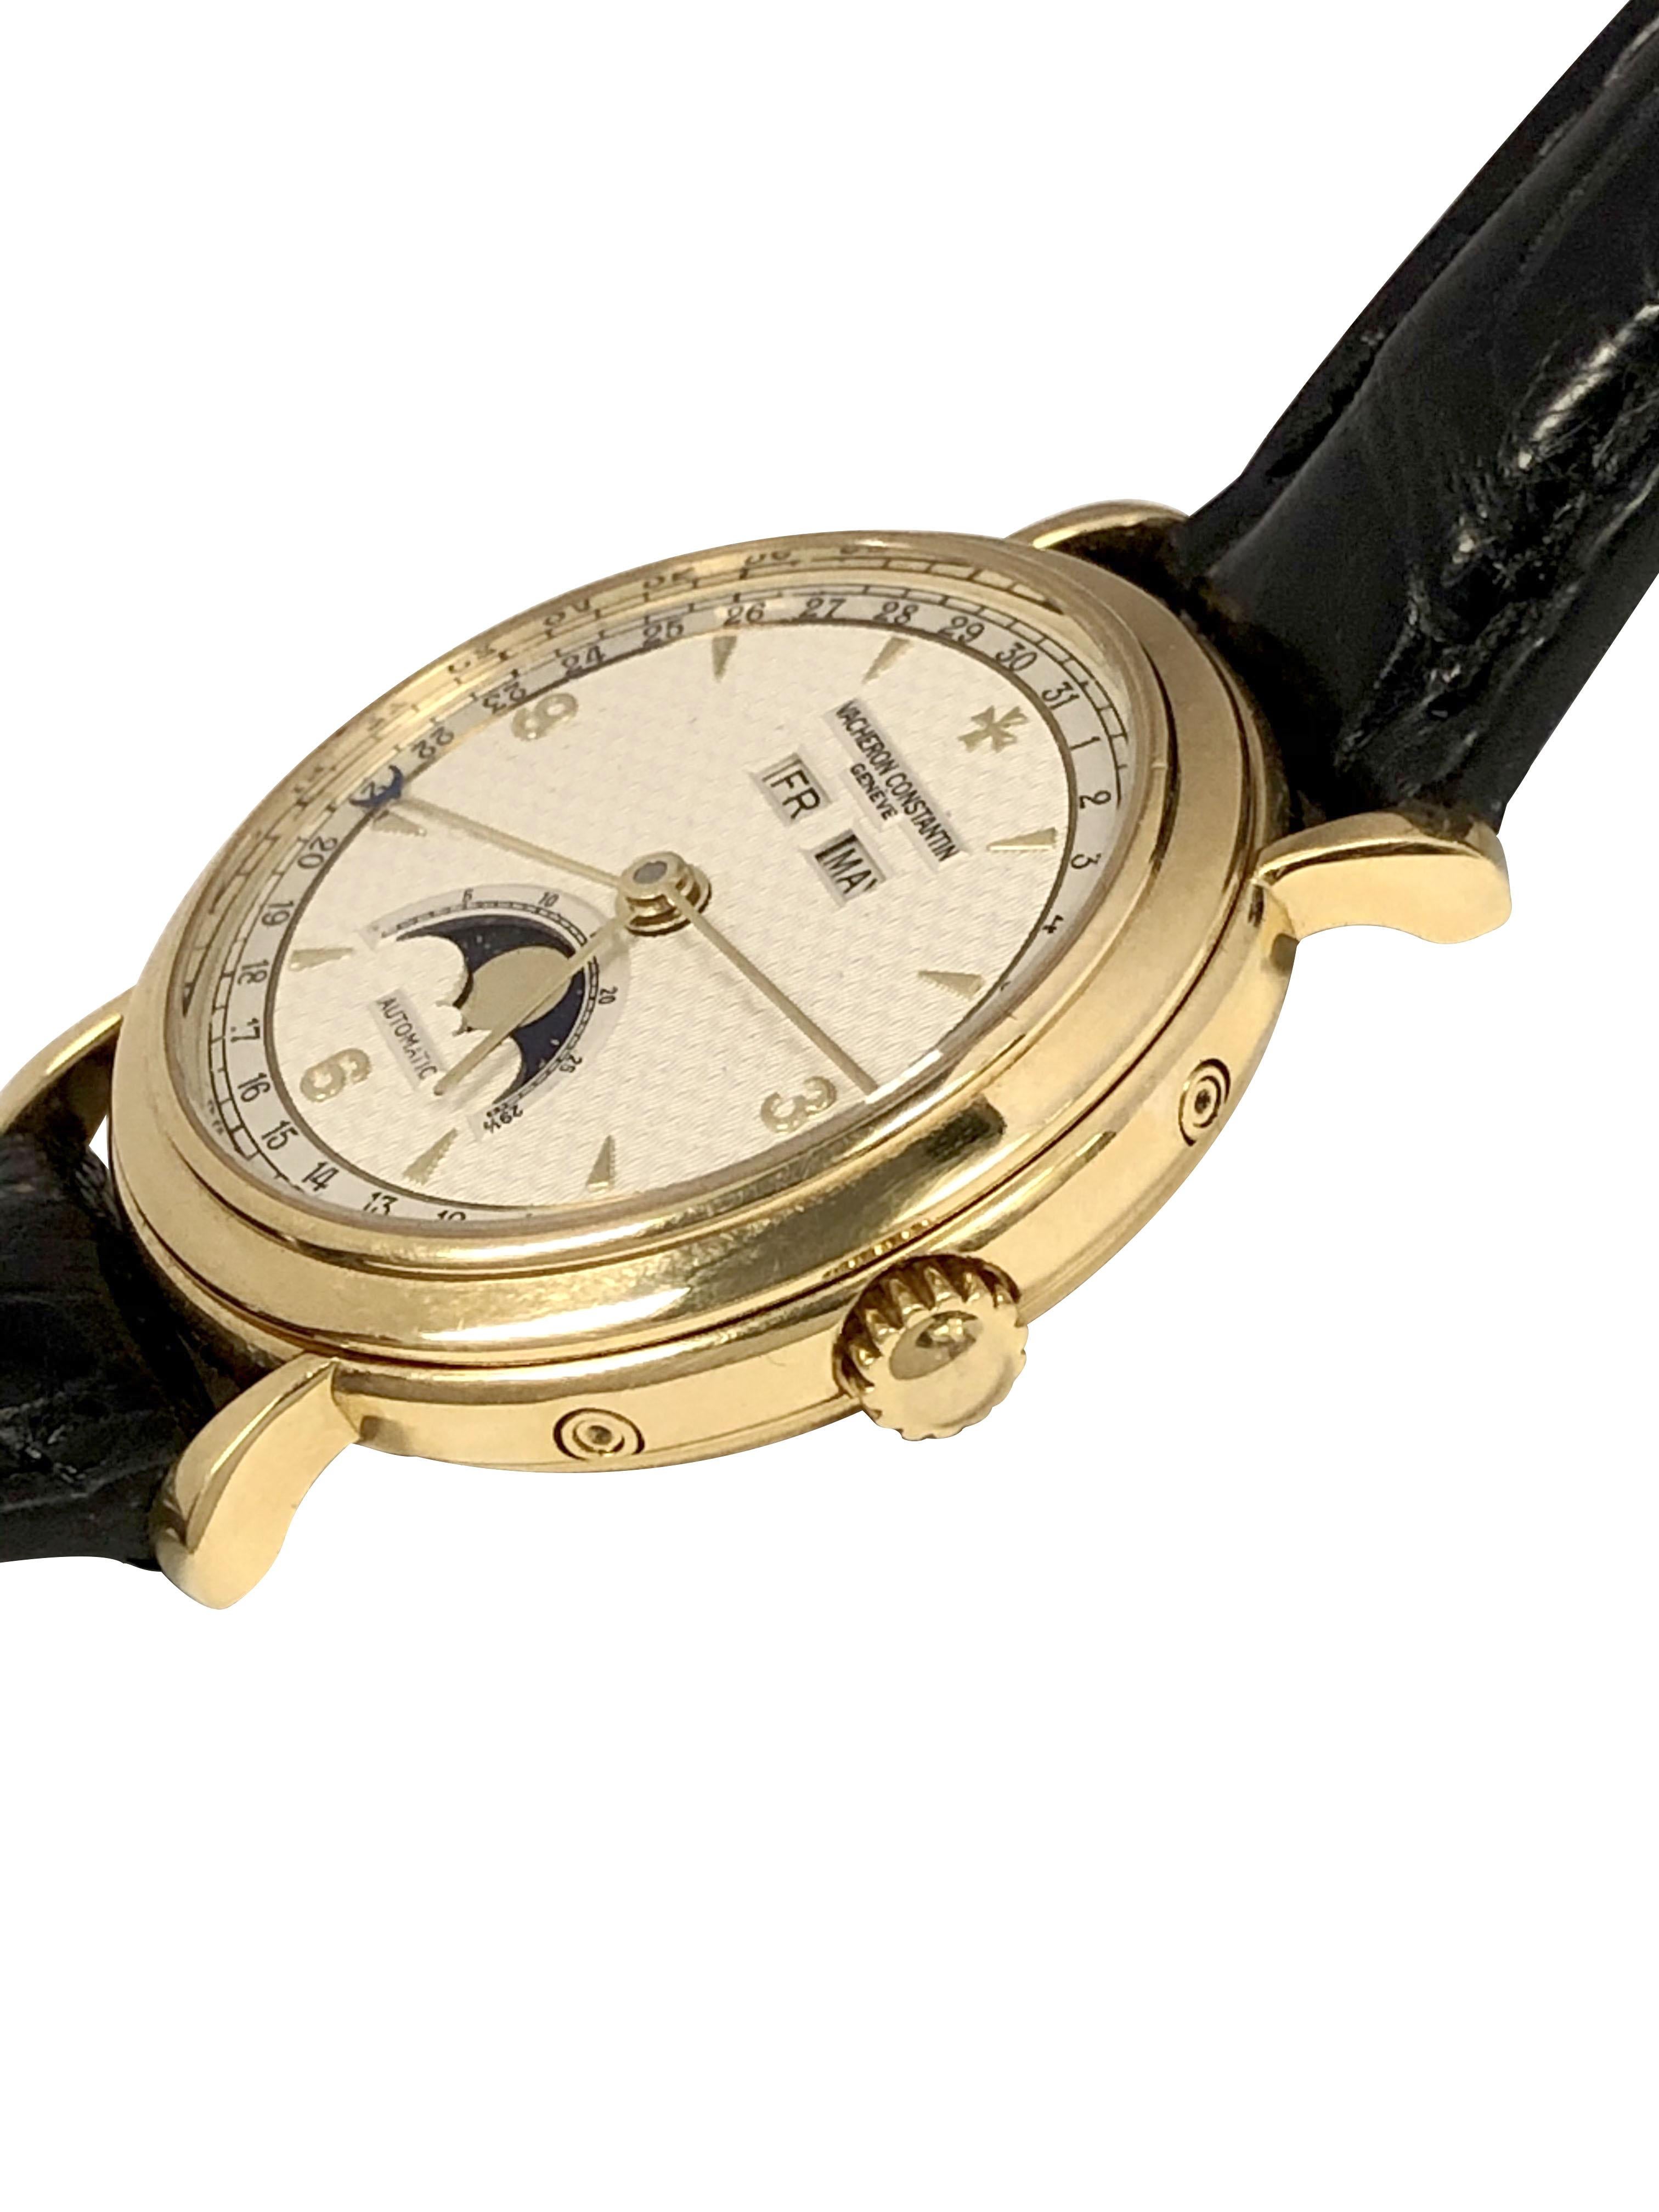 Circa 2000 Vacheron Constantin Wrist Watch, REF 47050,  36 mm, 18k Yellow Gold 3 piece case that is 10 MM in thickness. Automatic, Self winding movement, Silver Satin Guilloche Textured Dial with Raised Gold Markers,  Moonphase, Day and Month